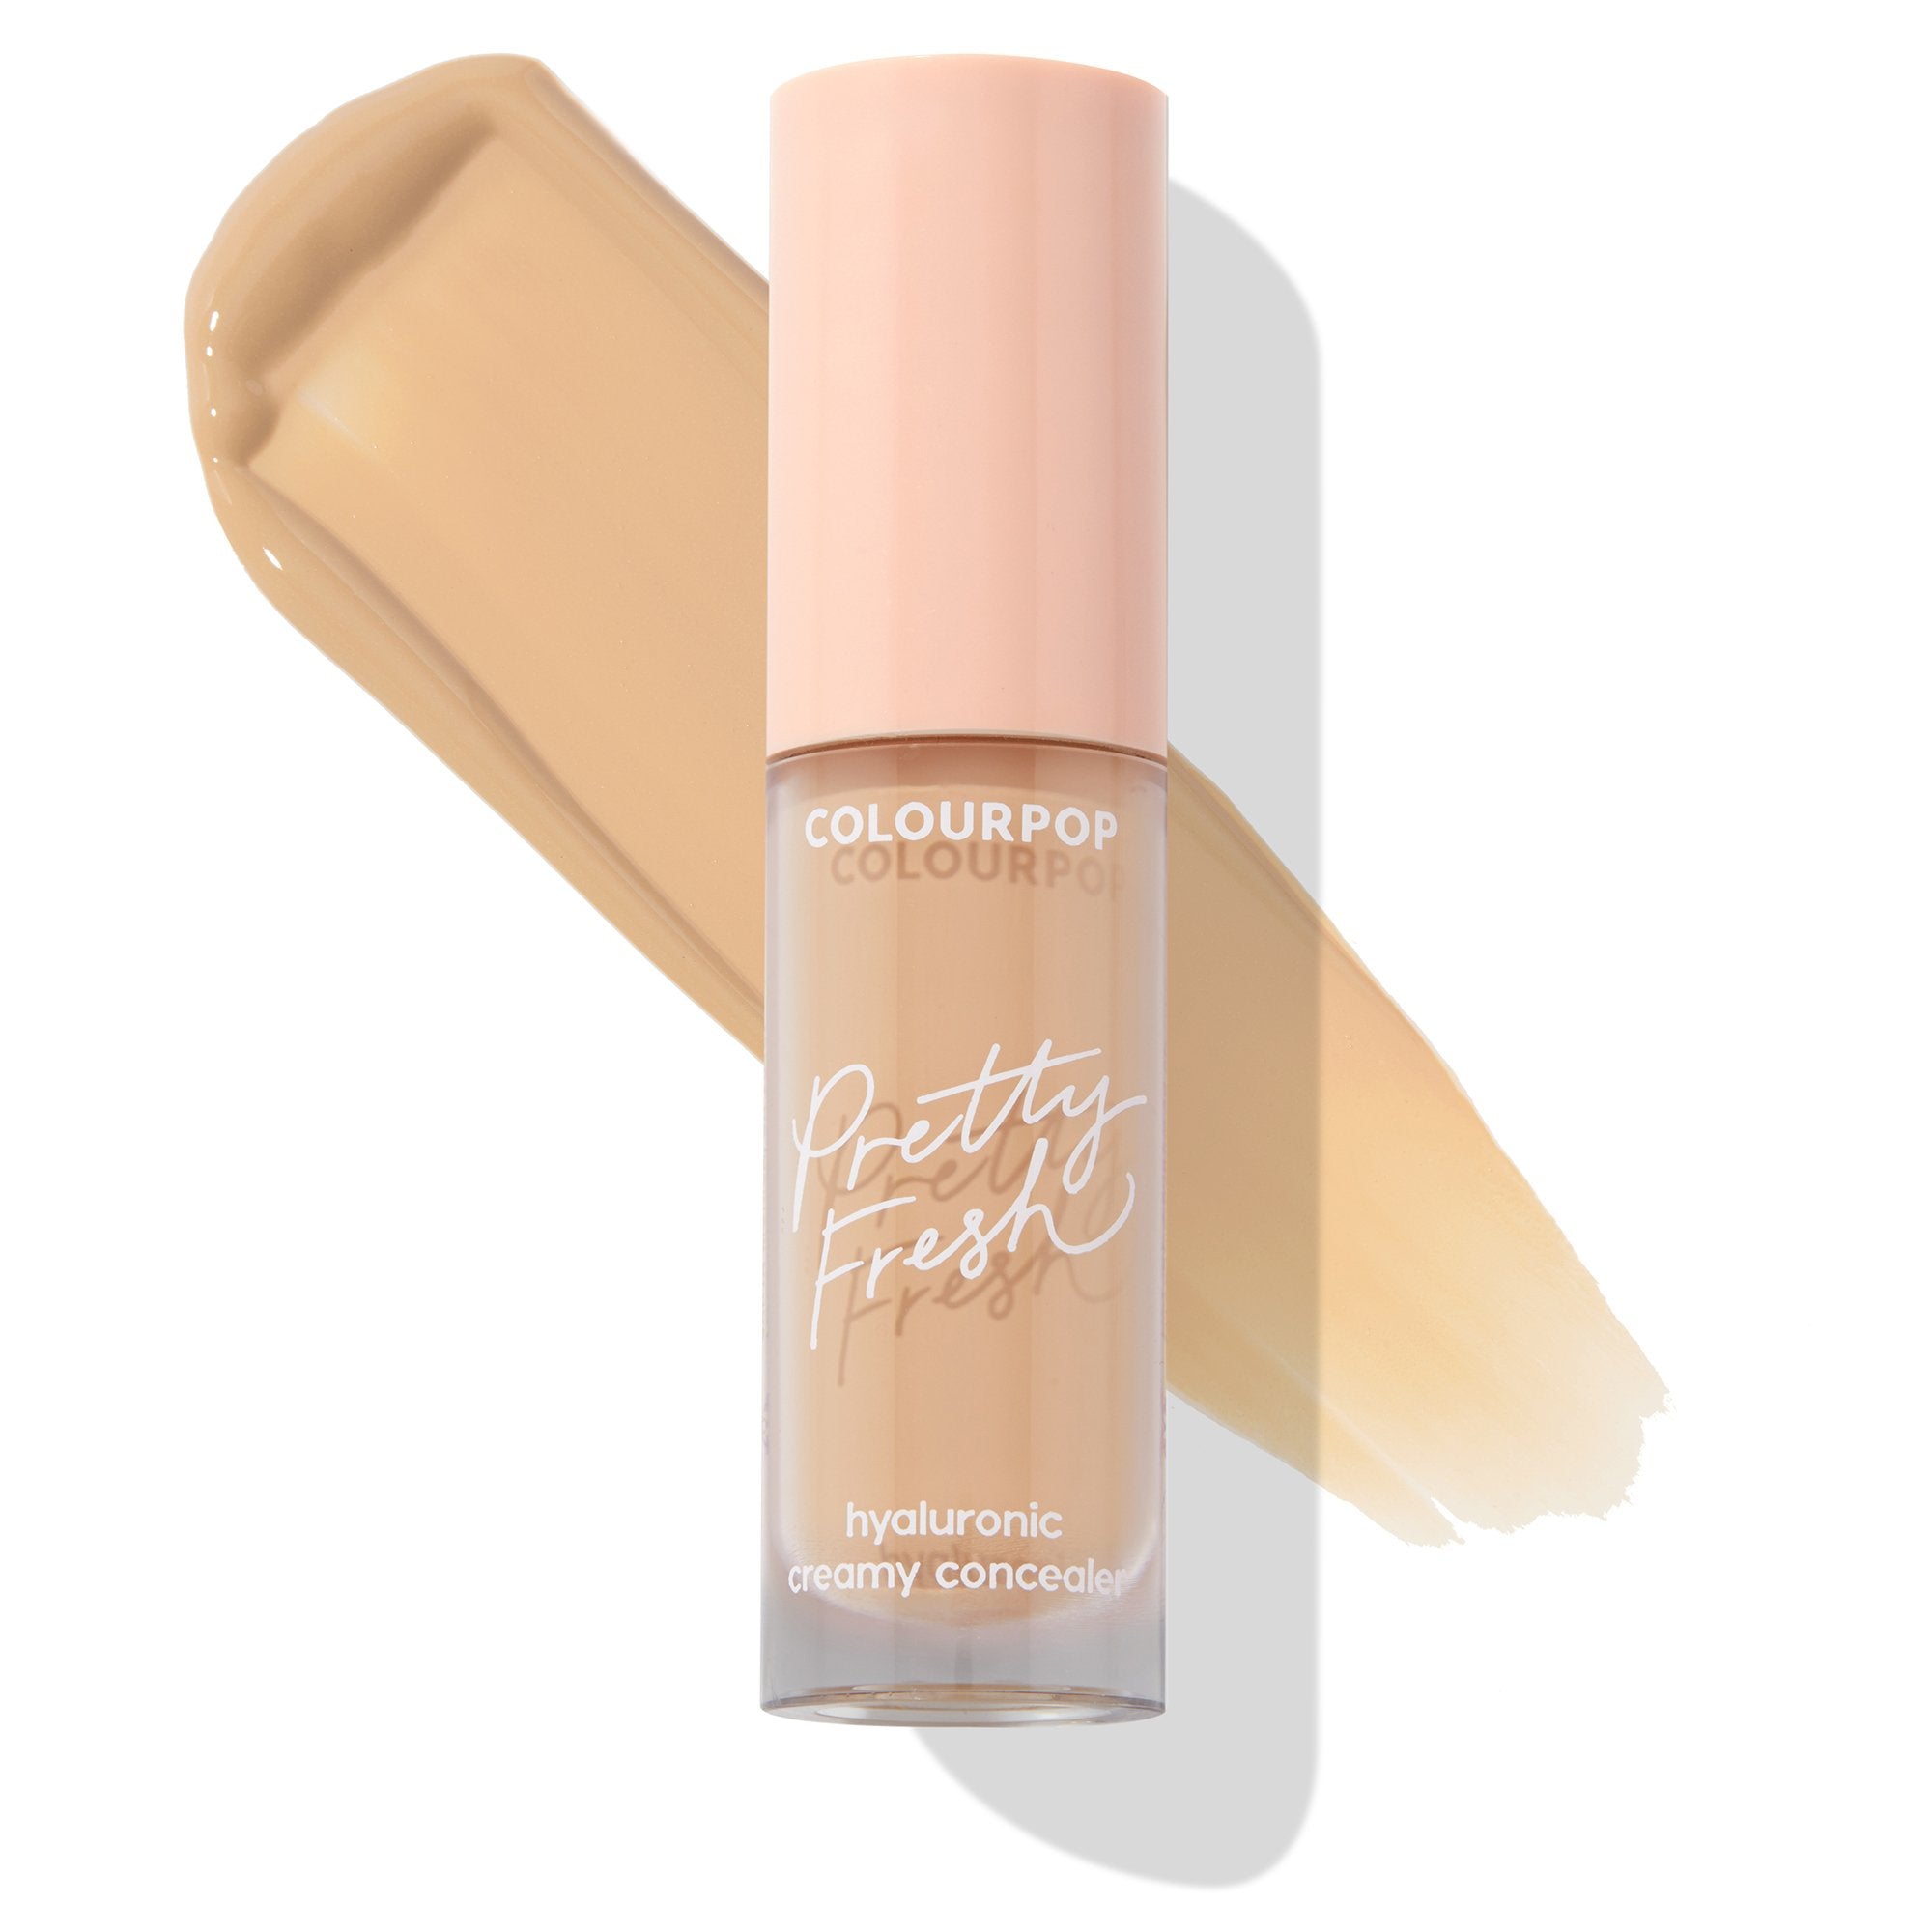 Hyaluronic Creamy Concealer